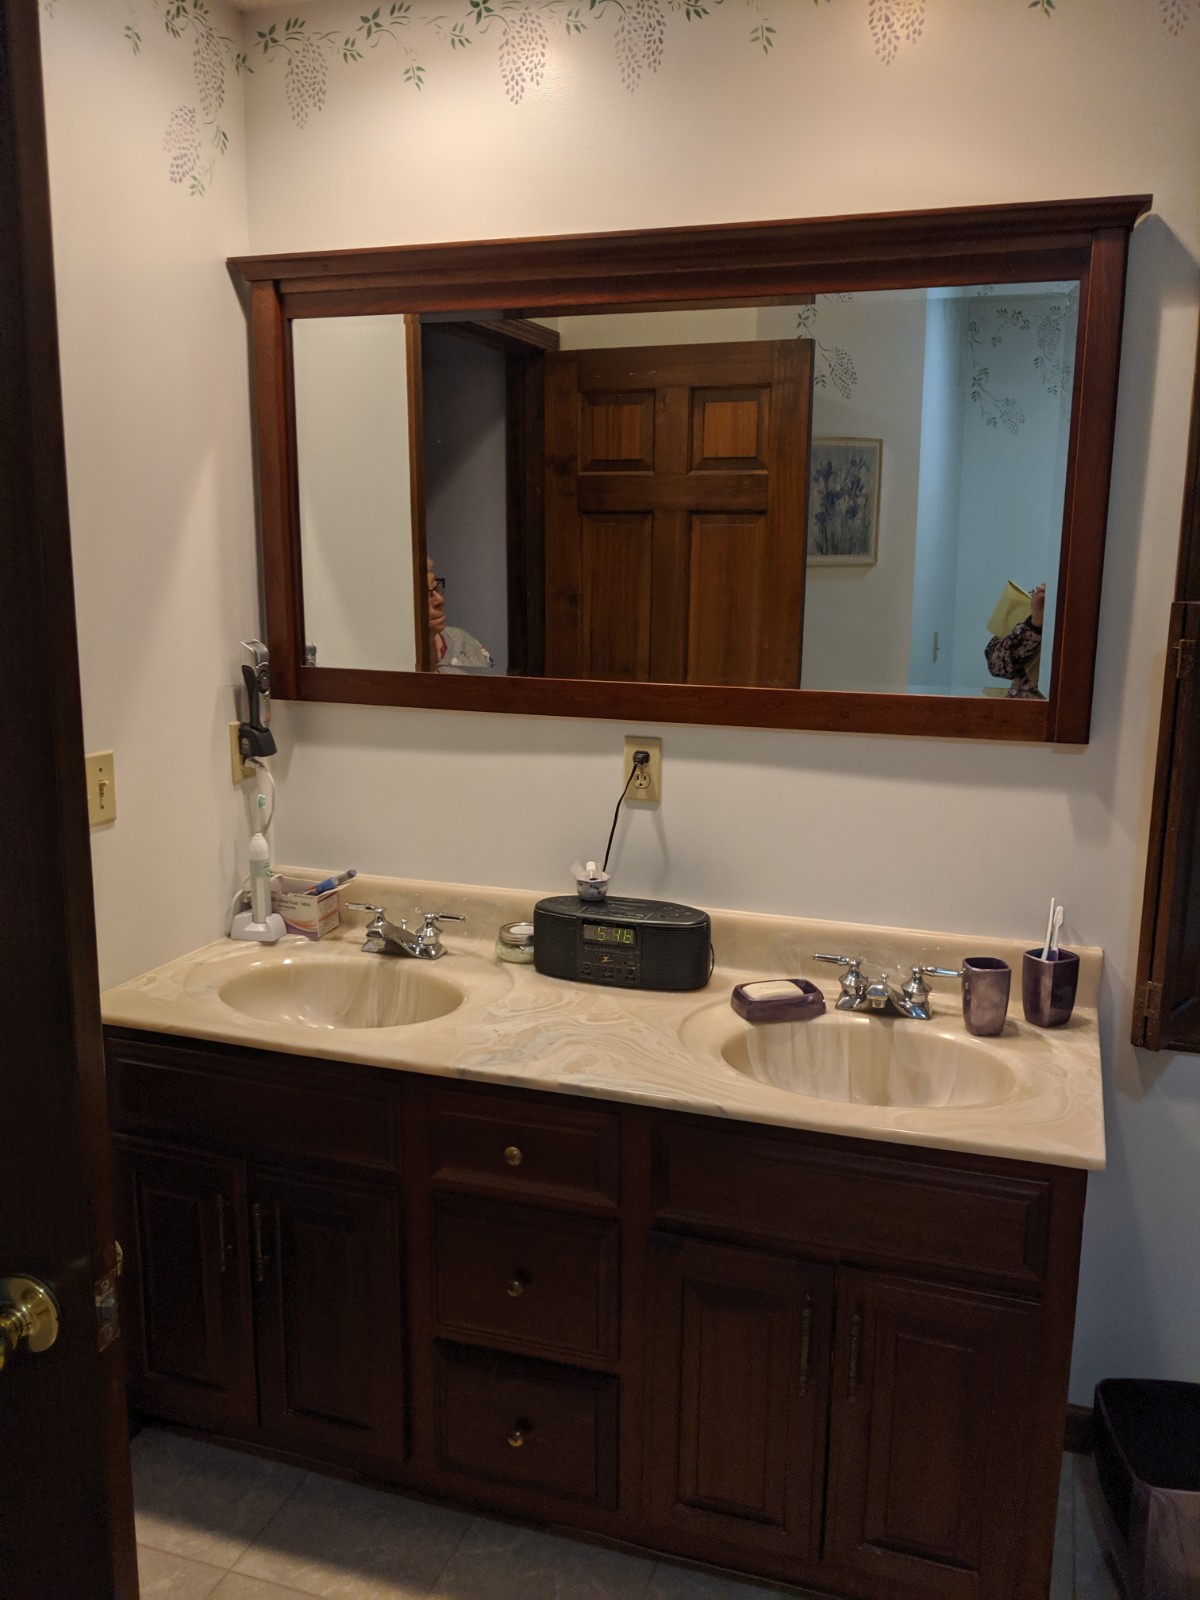 Outdated cultured marble double vanity top with outdated fixtures